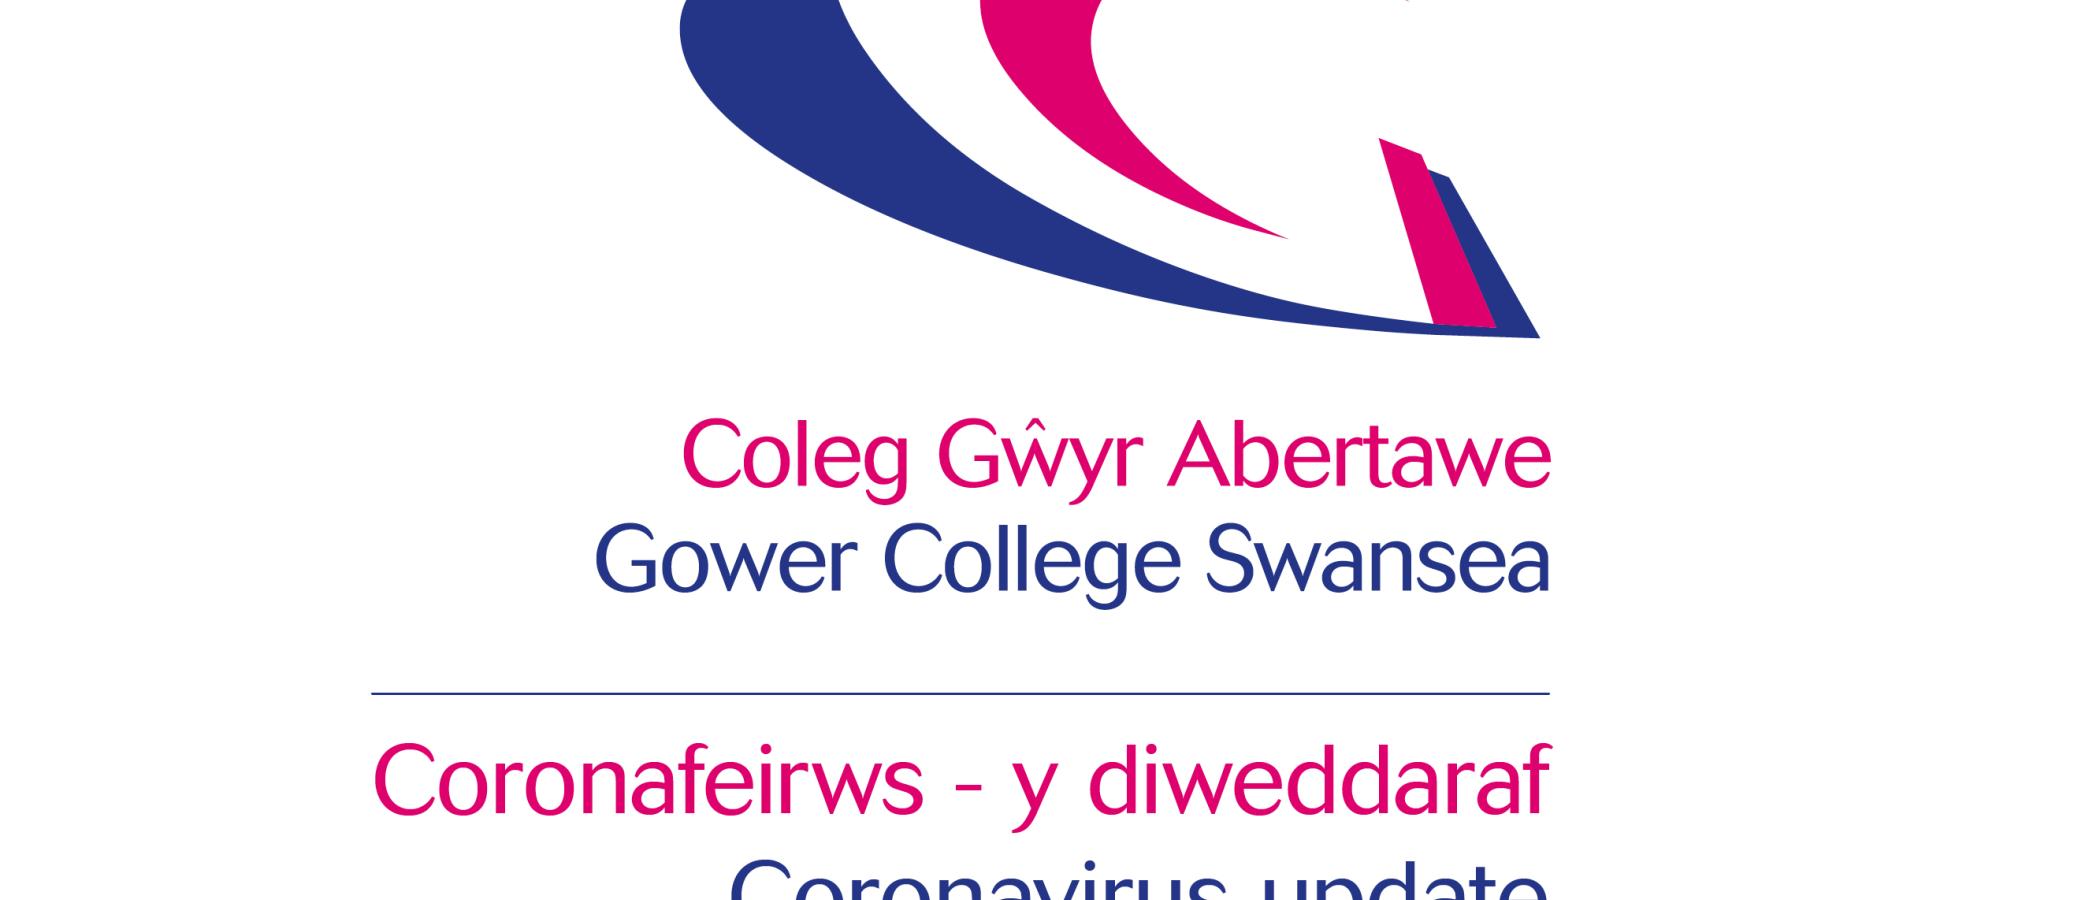 Local lockdown announced for Swansea, what does this mean for the College?